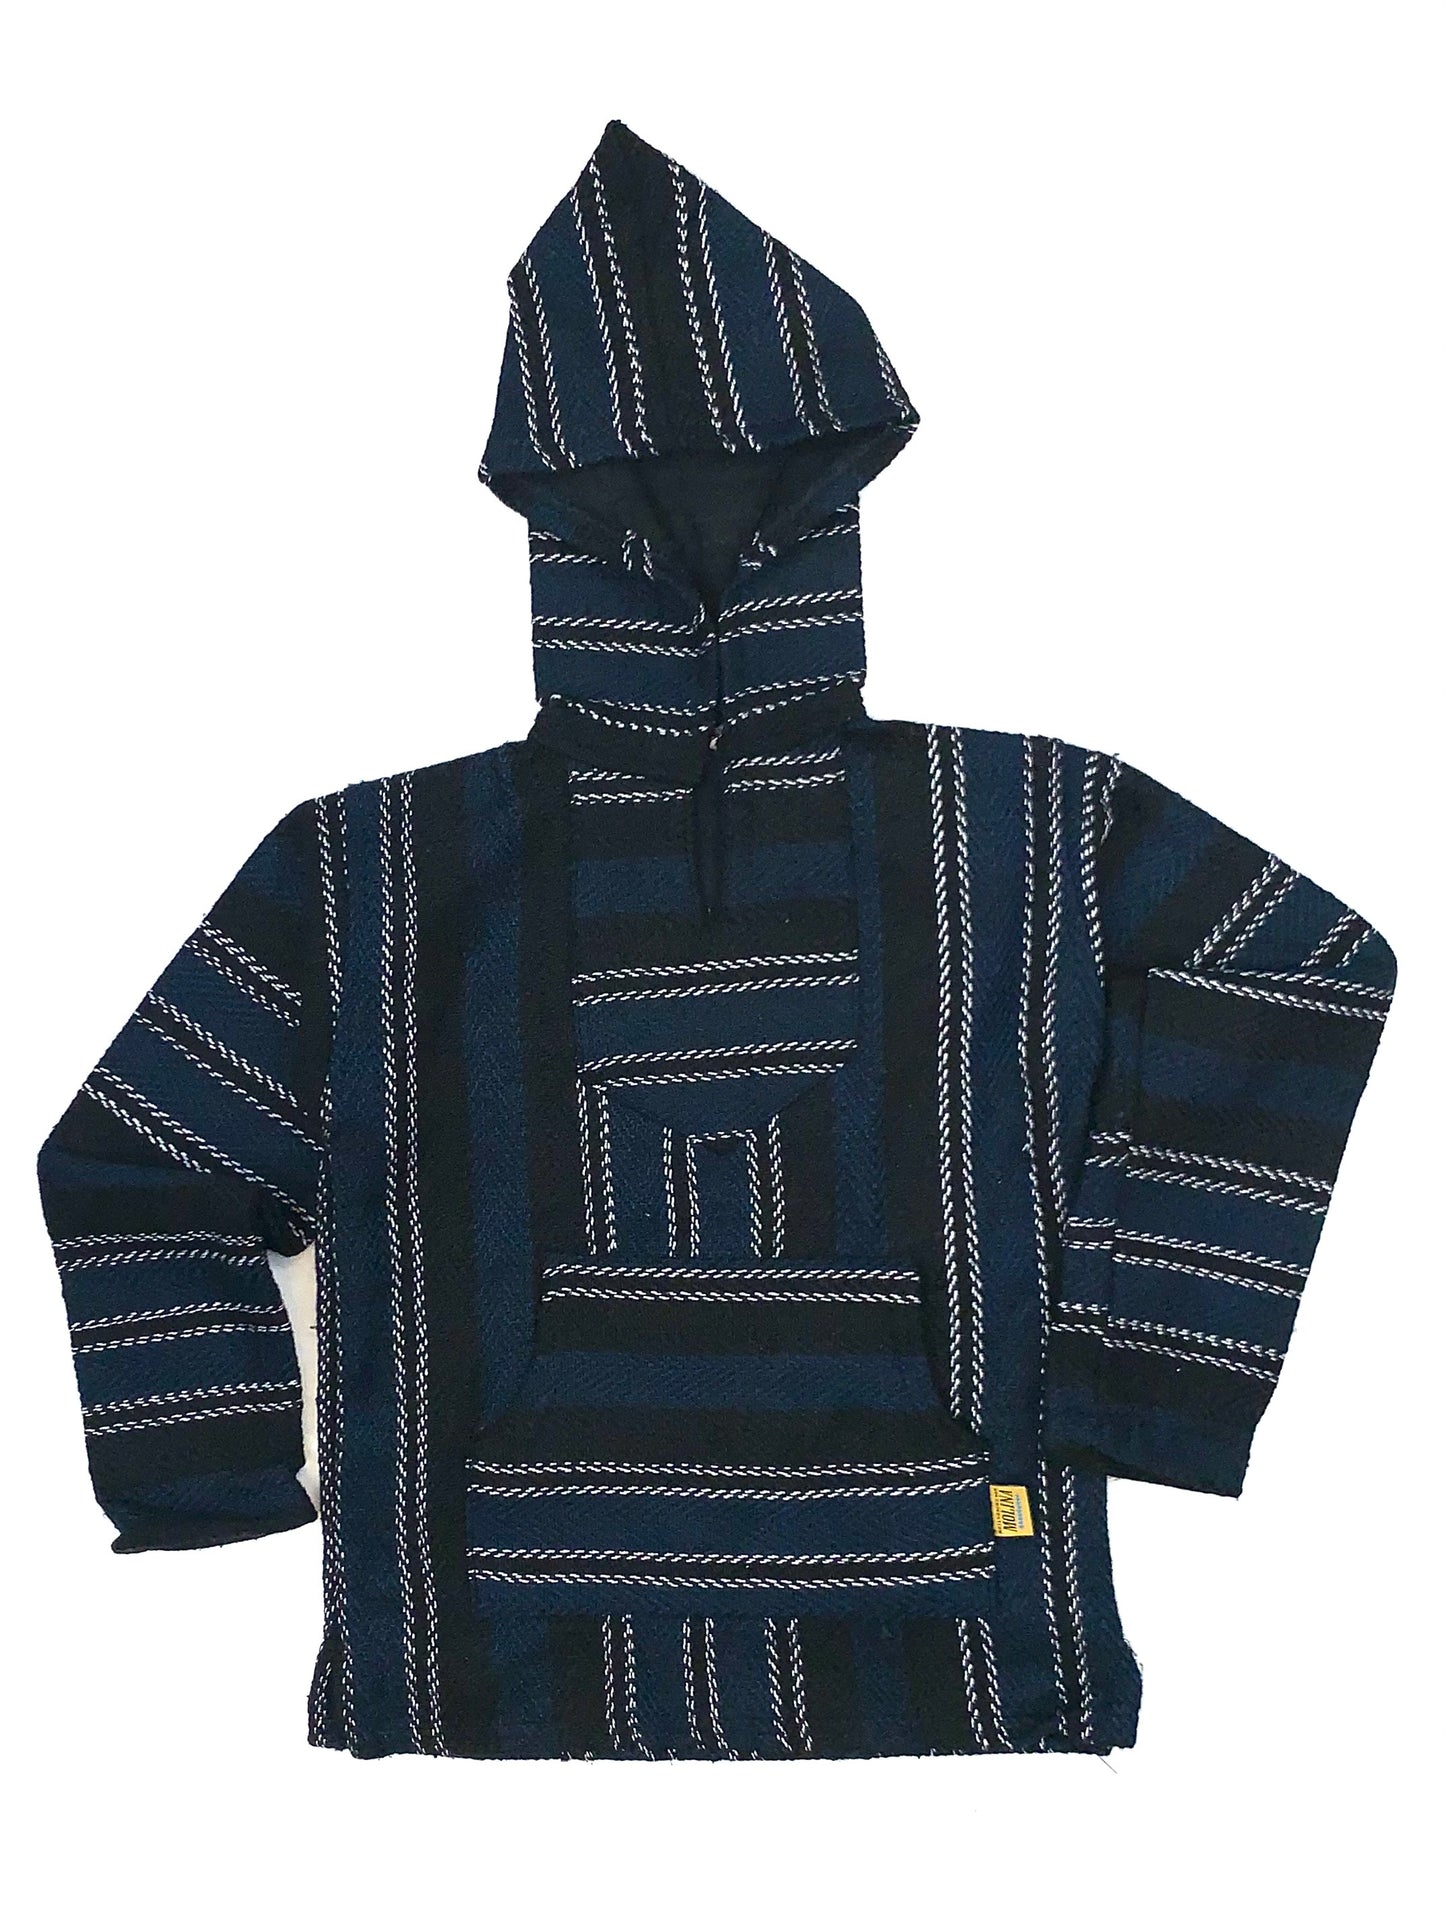 Limited Time Children's Small Mexican Baja Hoodies